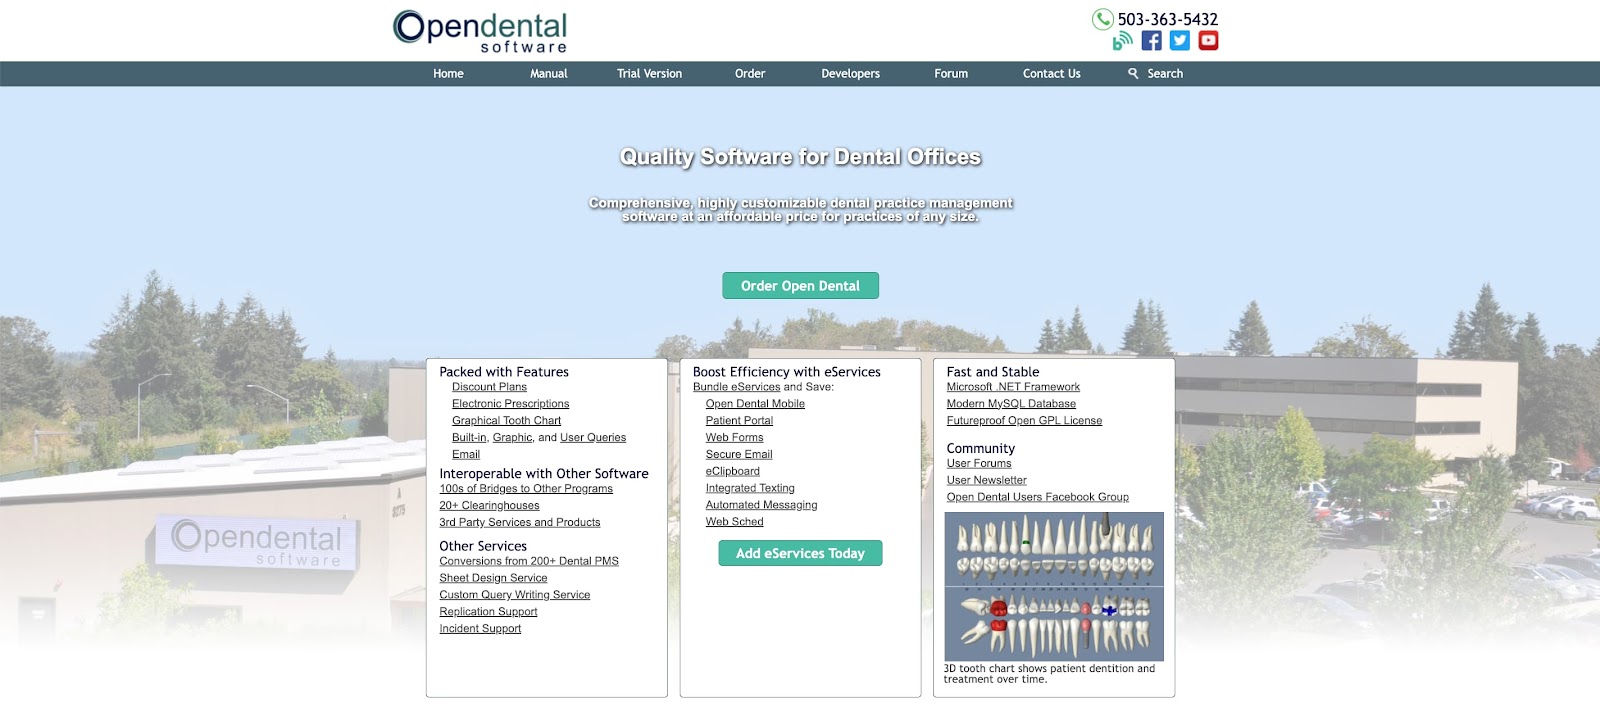 open dental quality software for dental offices